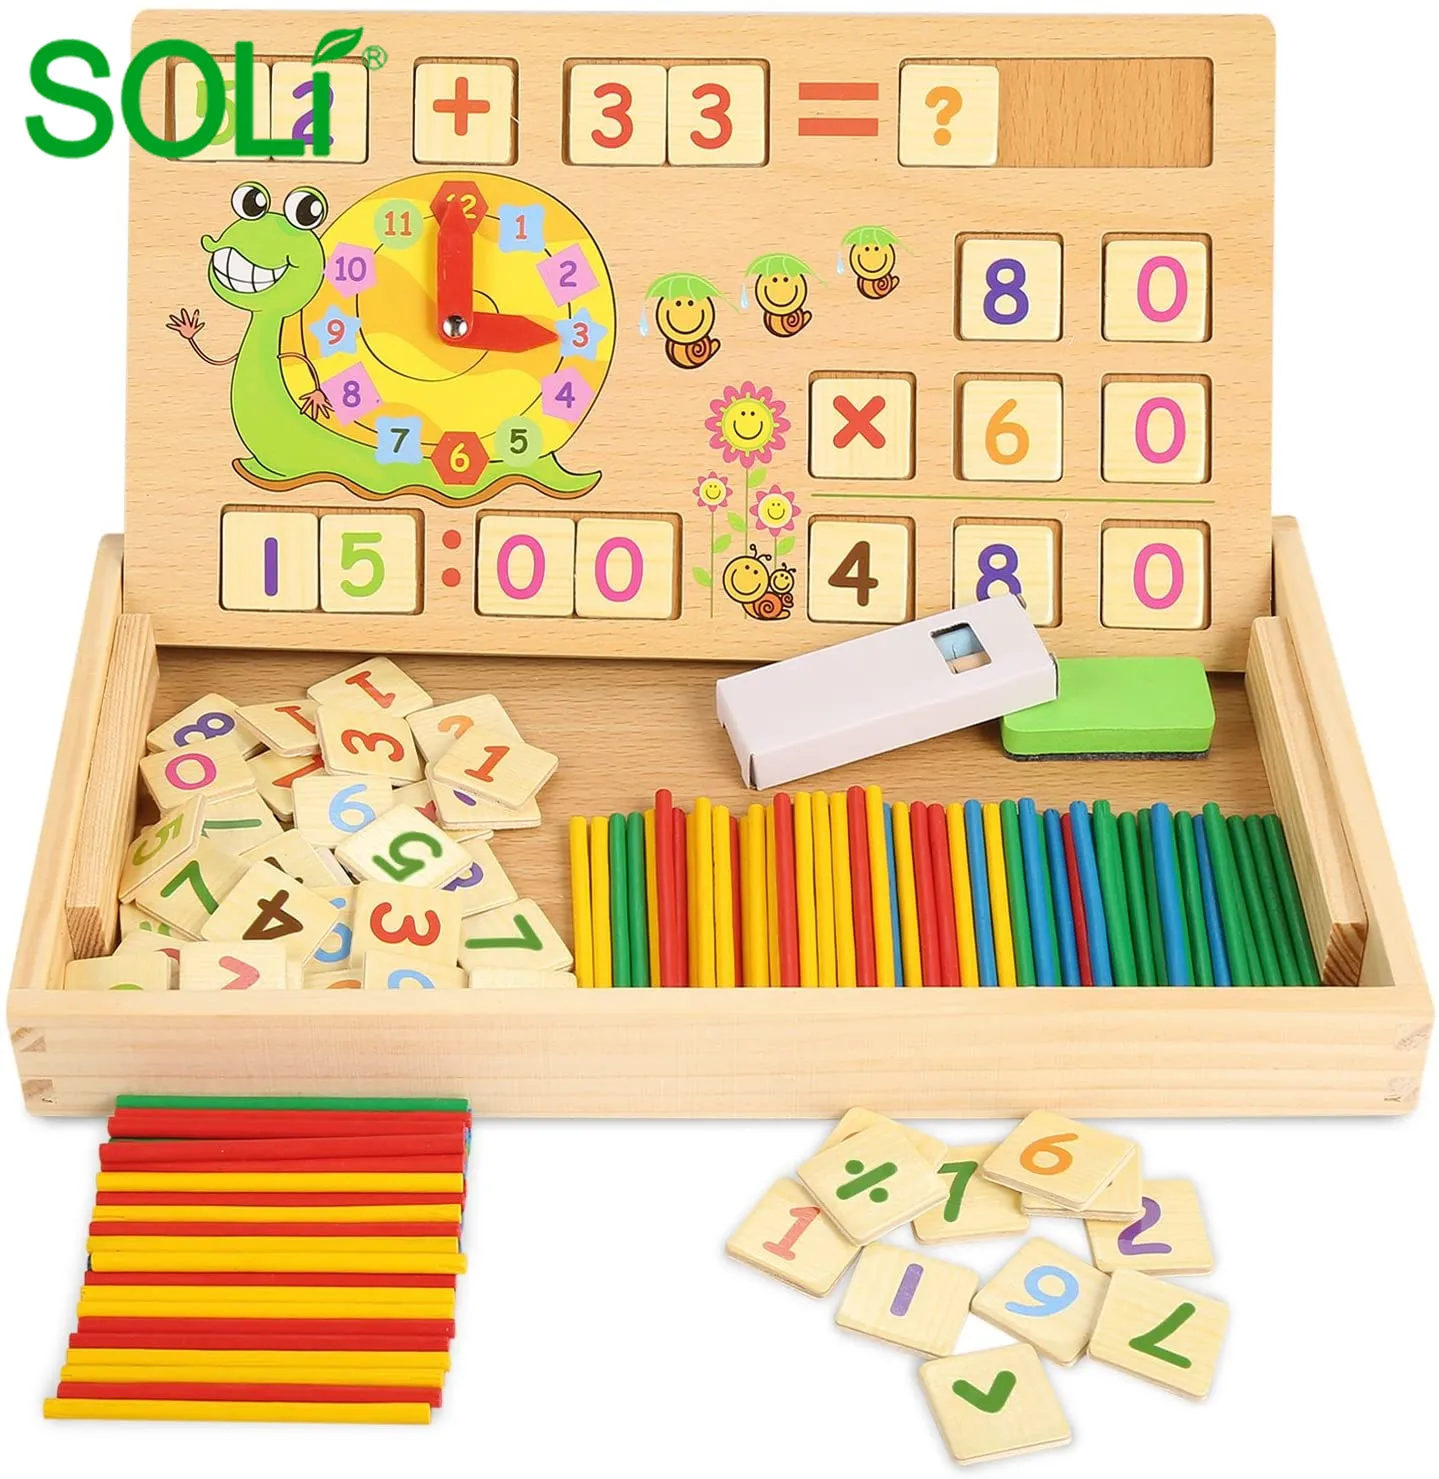 Popular Educational Counting Toys Math Number Counting Teaching Tools Montessori Preschool Toys for Toddlers Wooden Toys